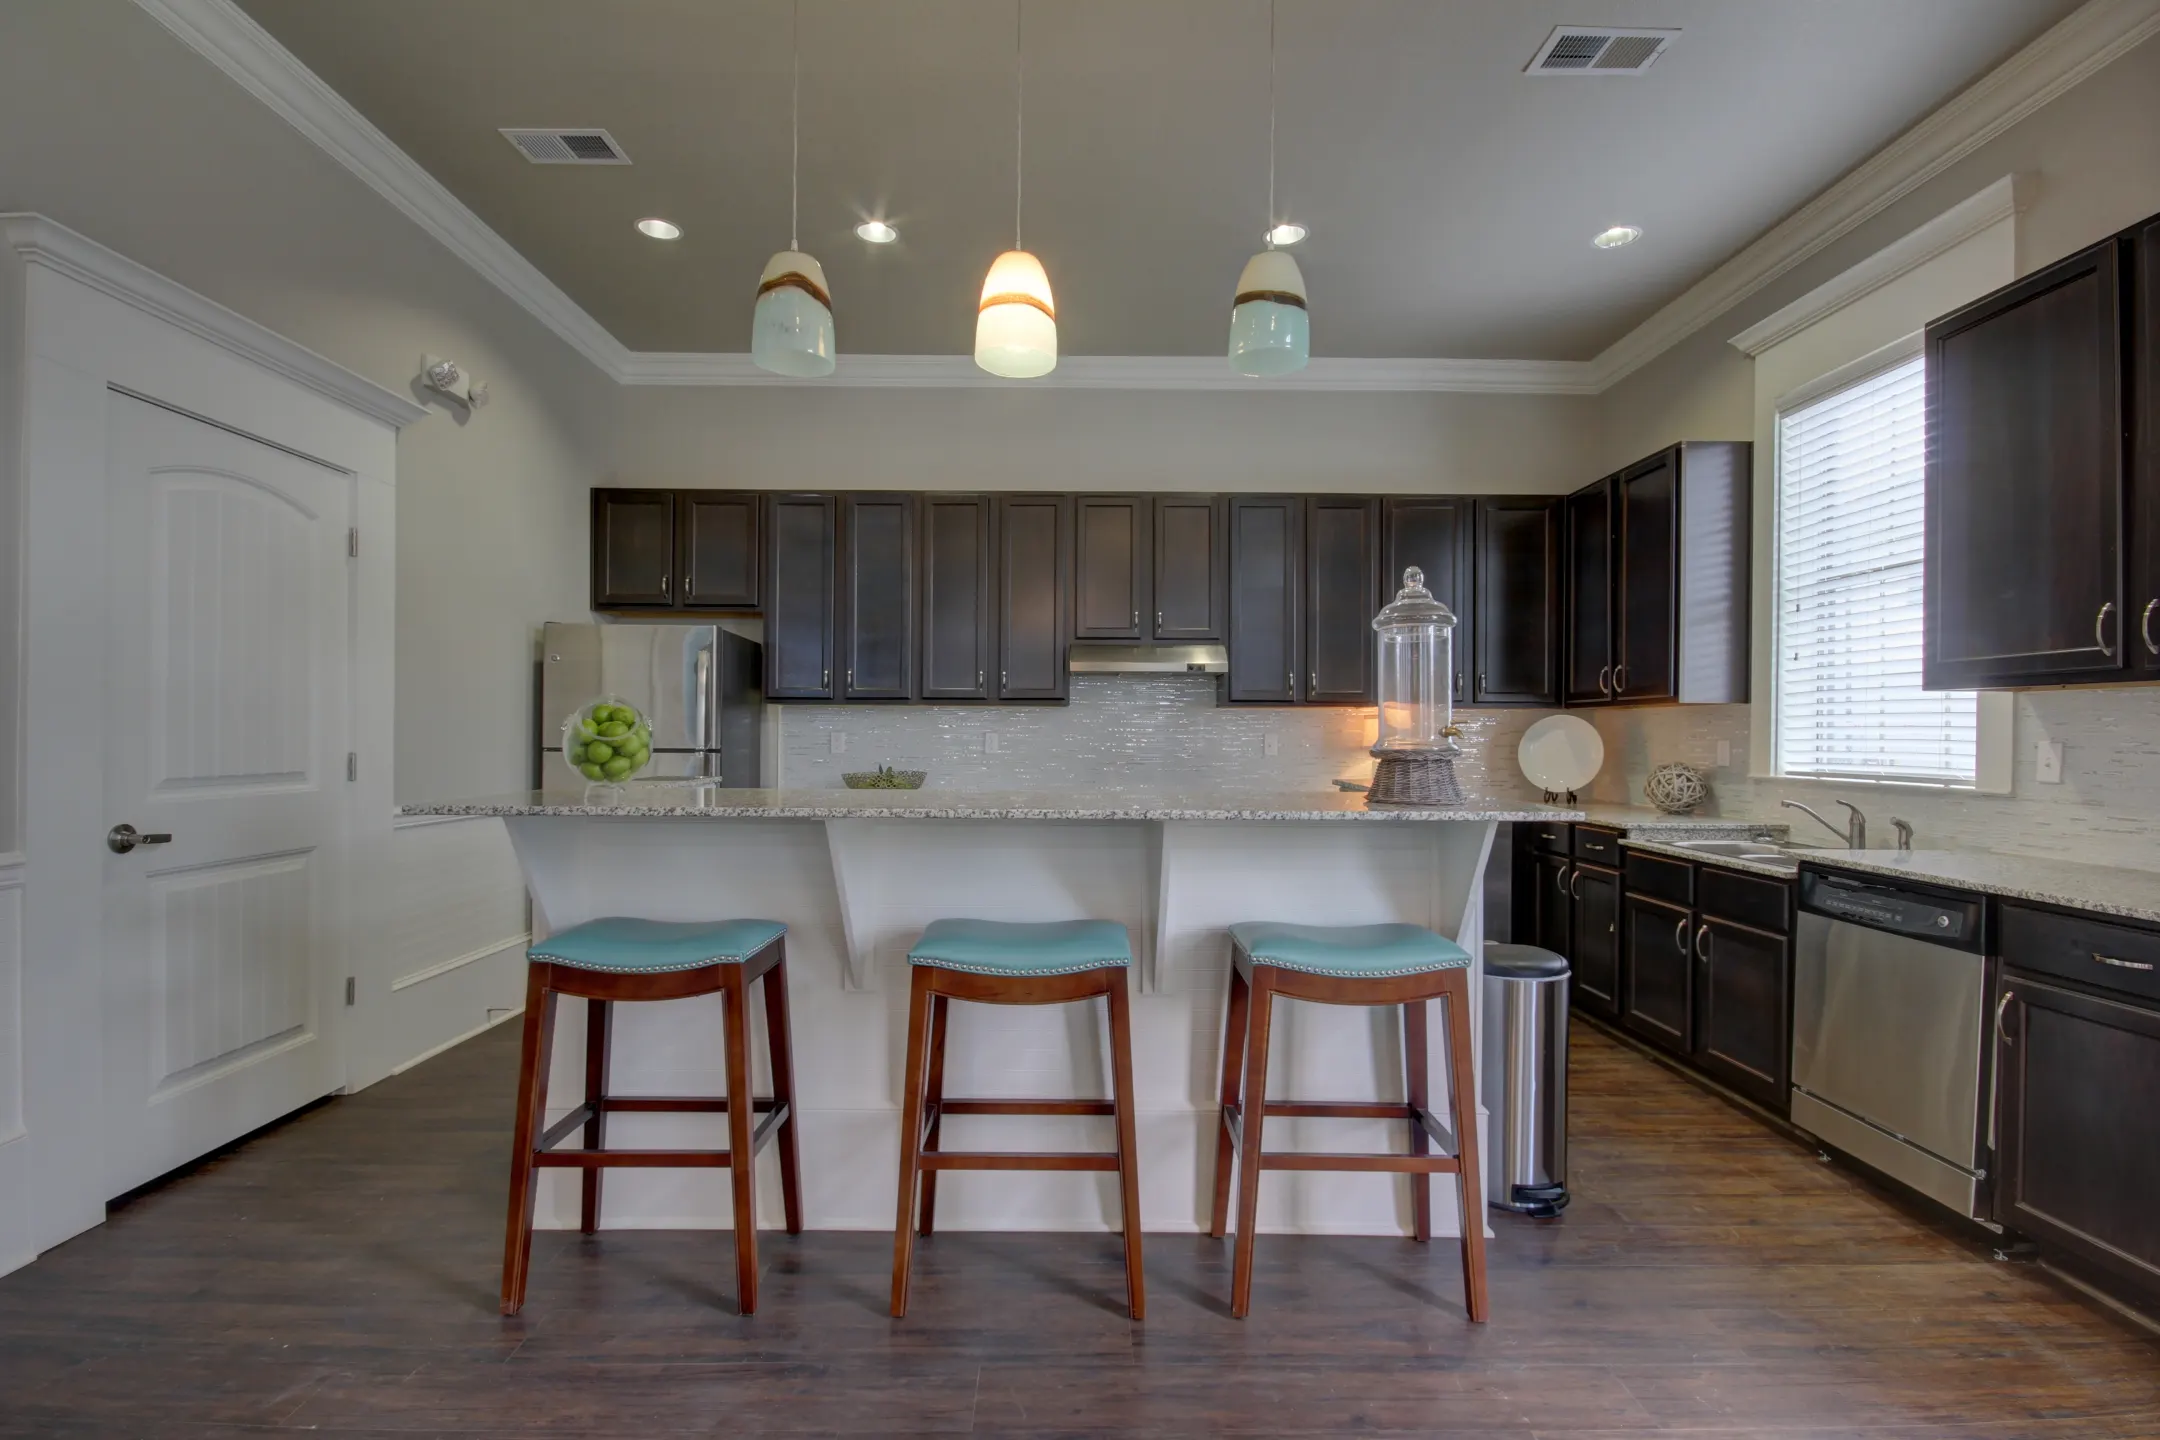 Kitchen - Waterview Luxury Apartments - Youngsville, LA